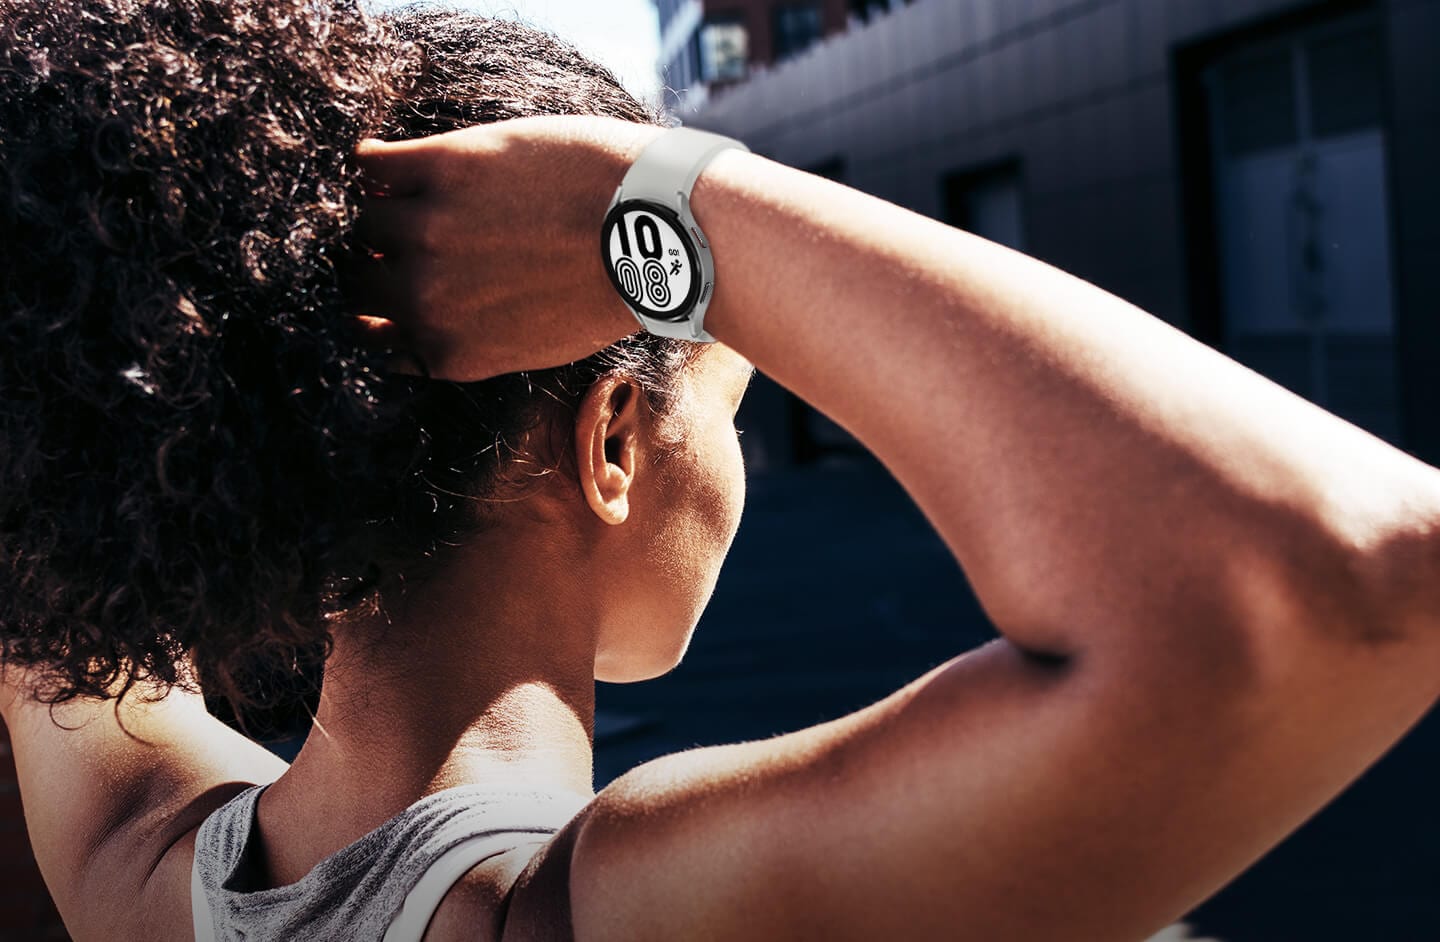 There is a woman outside wearing workout clothes and raising her hands to tie her hair. She is wearing a Galaxy Watch4 with a Silver color sport band. The watch is displaying the time and a UI icon with a running symbol that says "GO!" above.